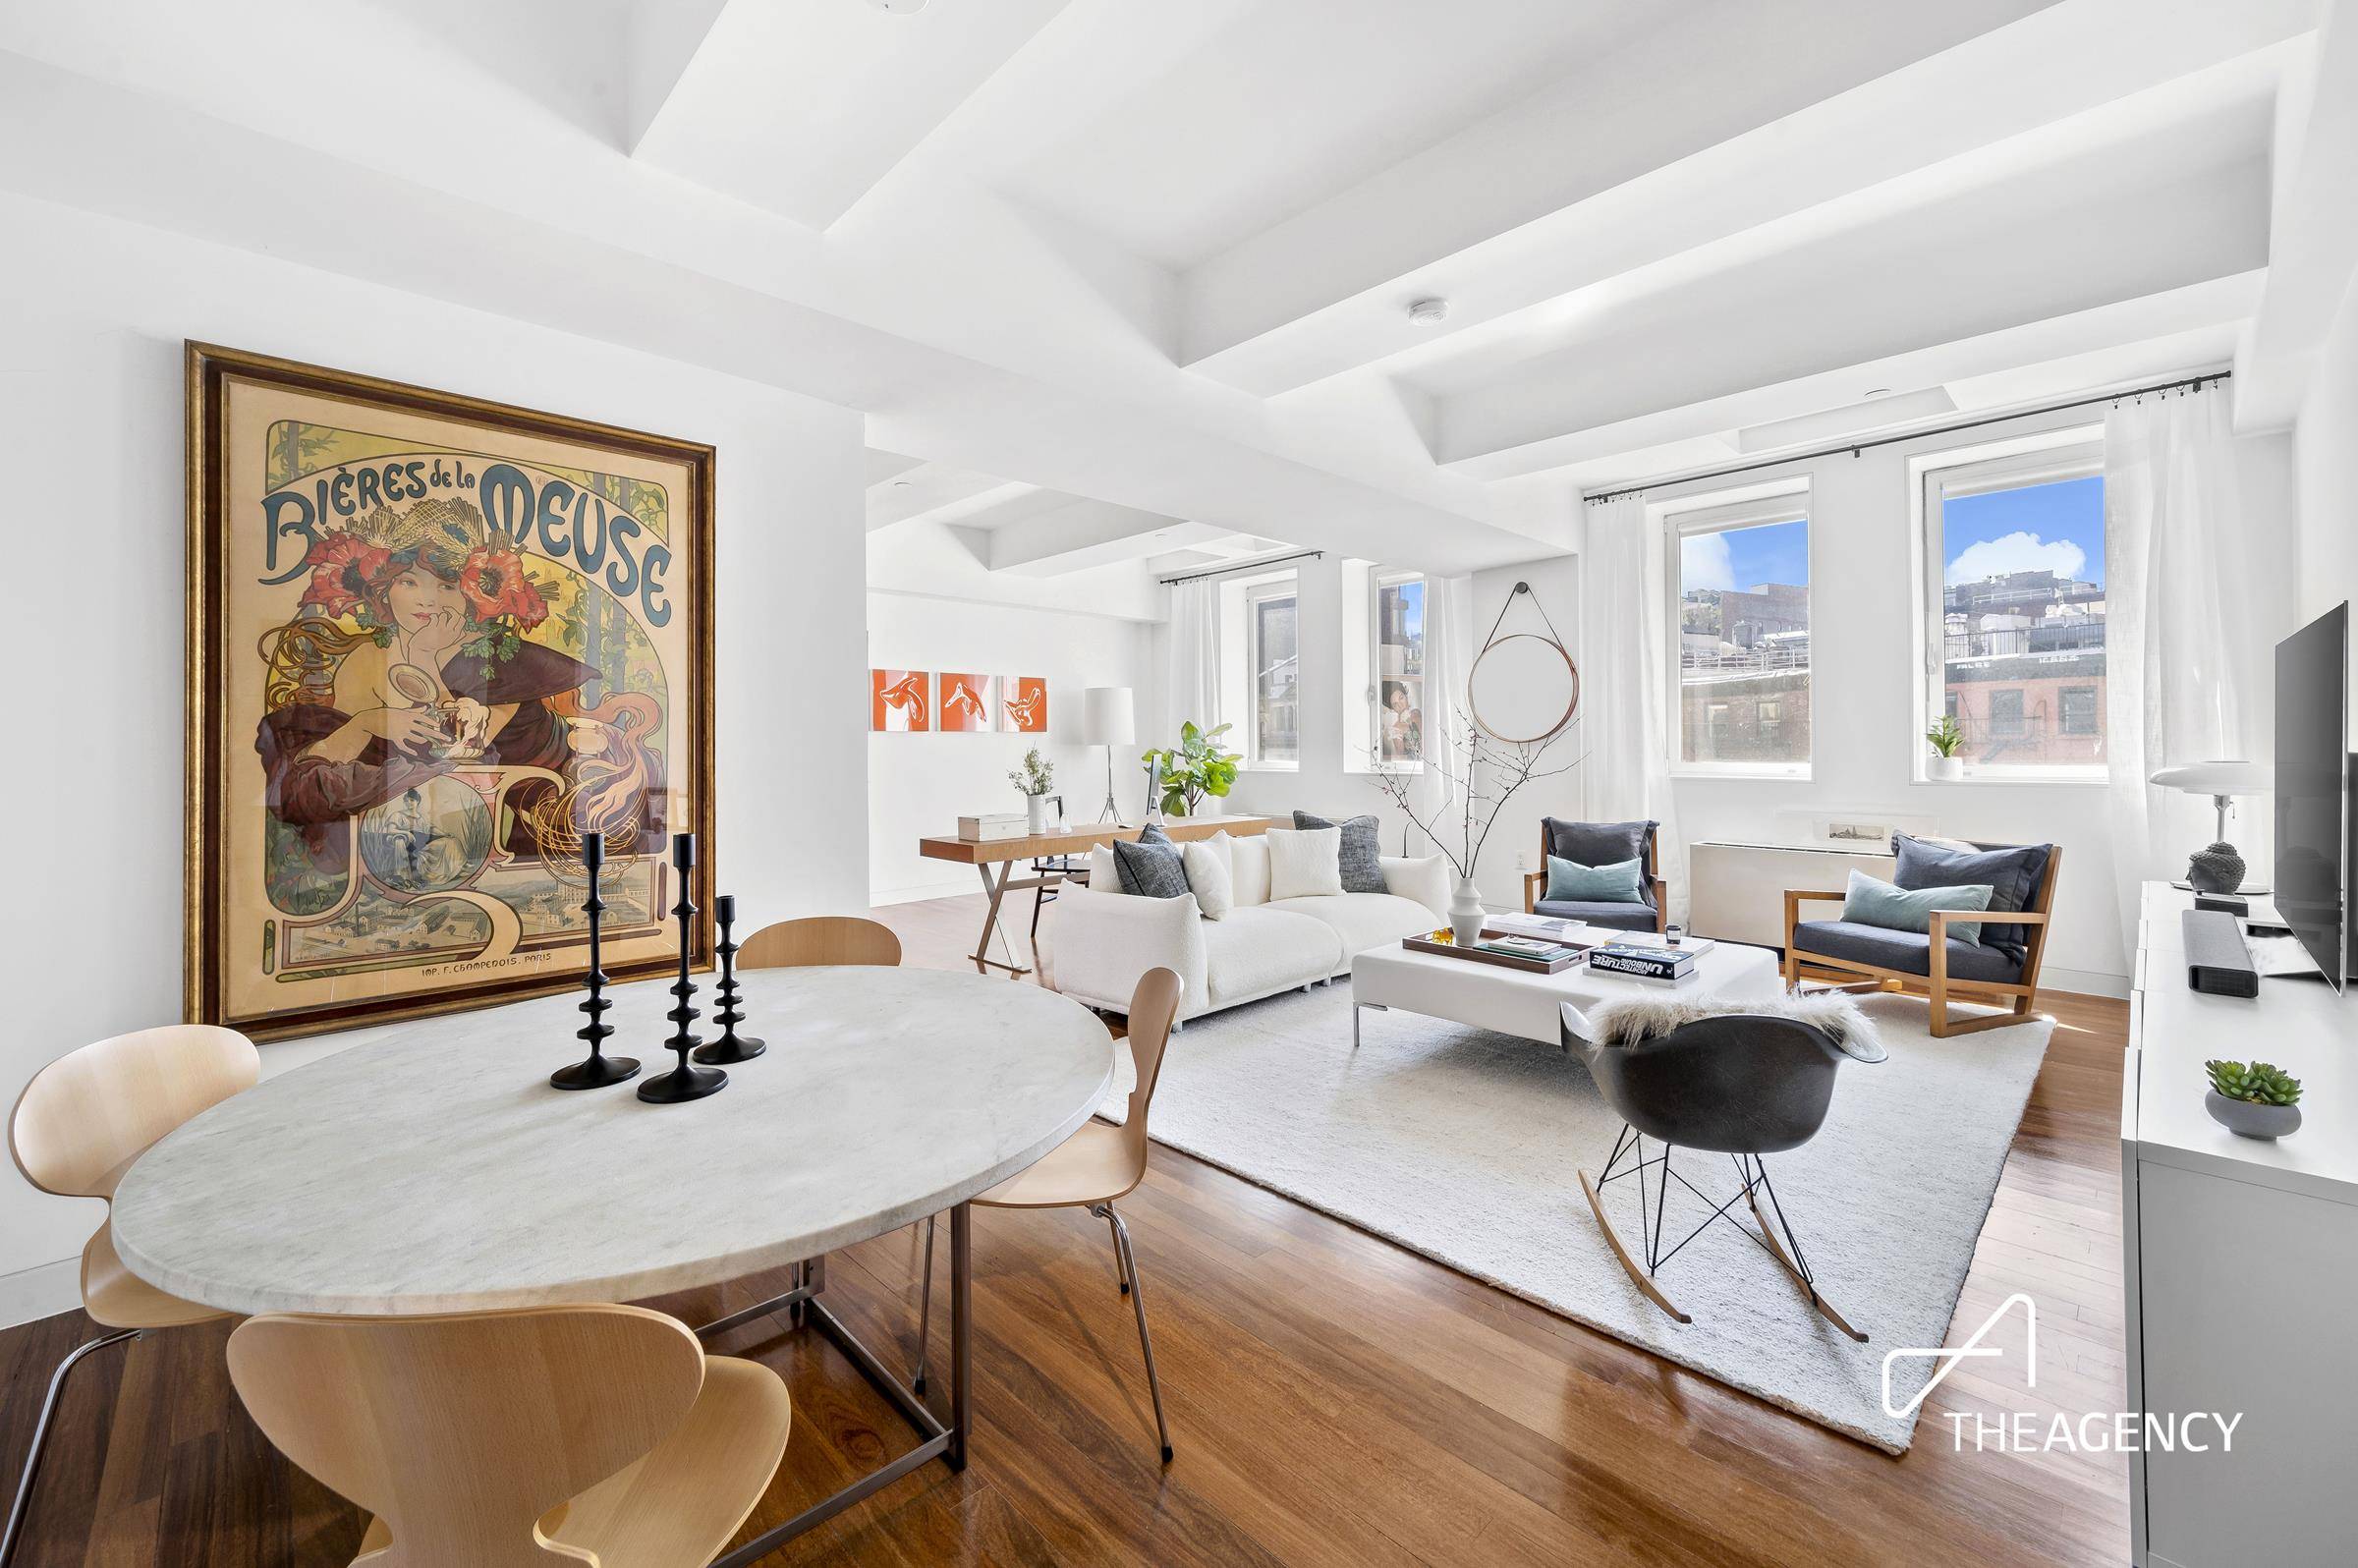 Pre war 2 bedroom, 2 bath, condominium in the nexus of Soho and Nolita, and flooded with Western light.